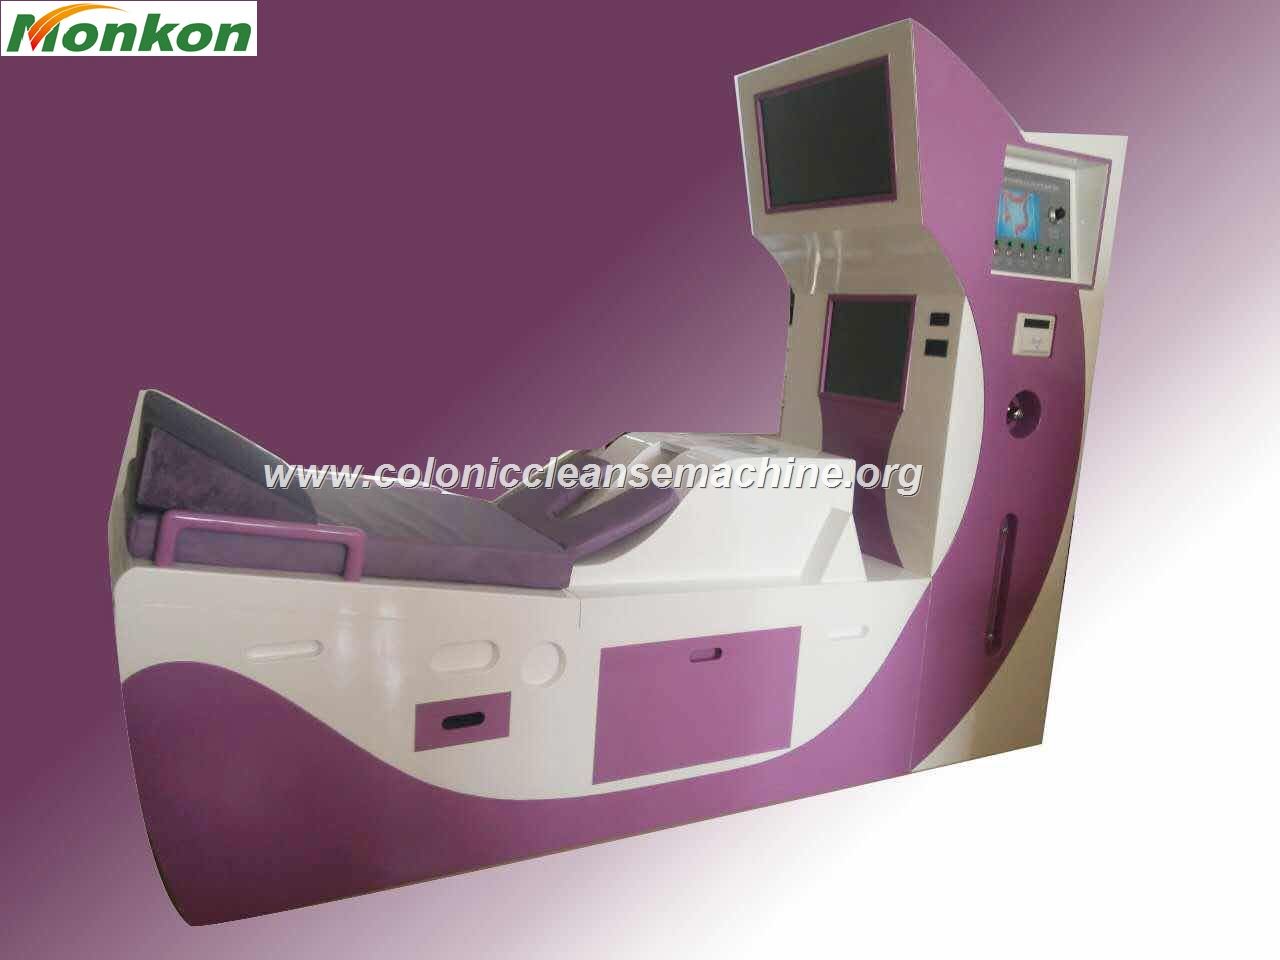 Where to buy MAIKONG colonic irrigation equipment